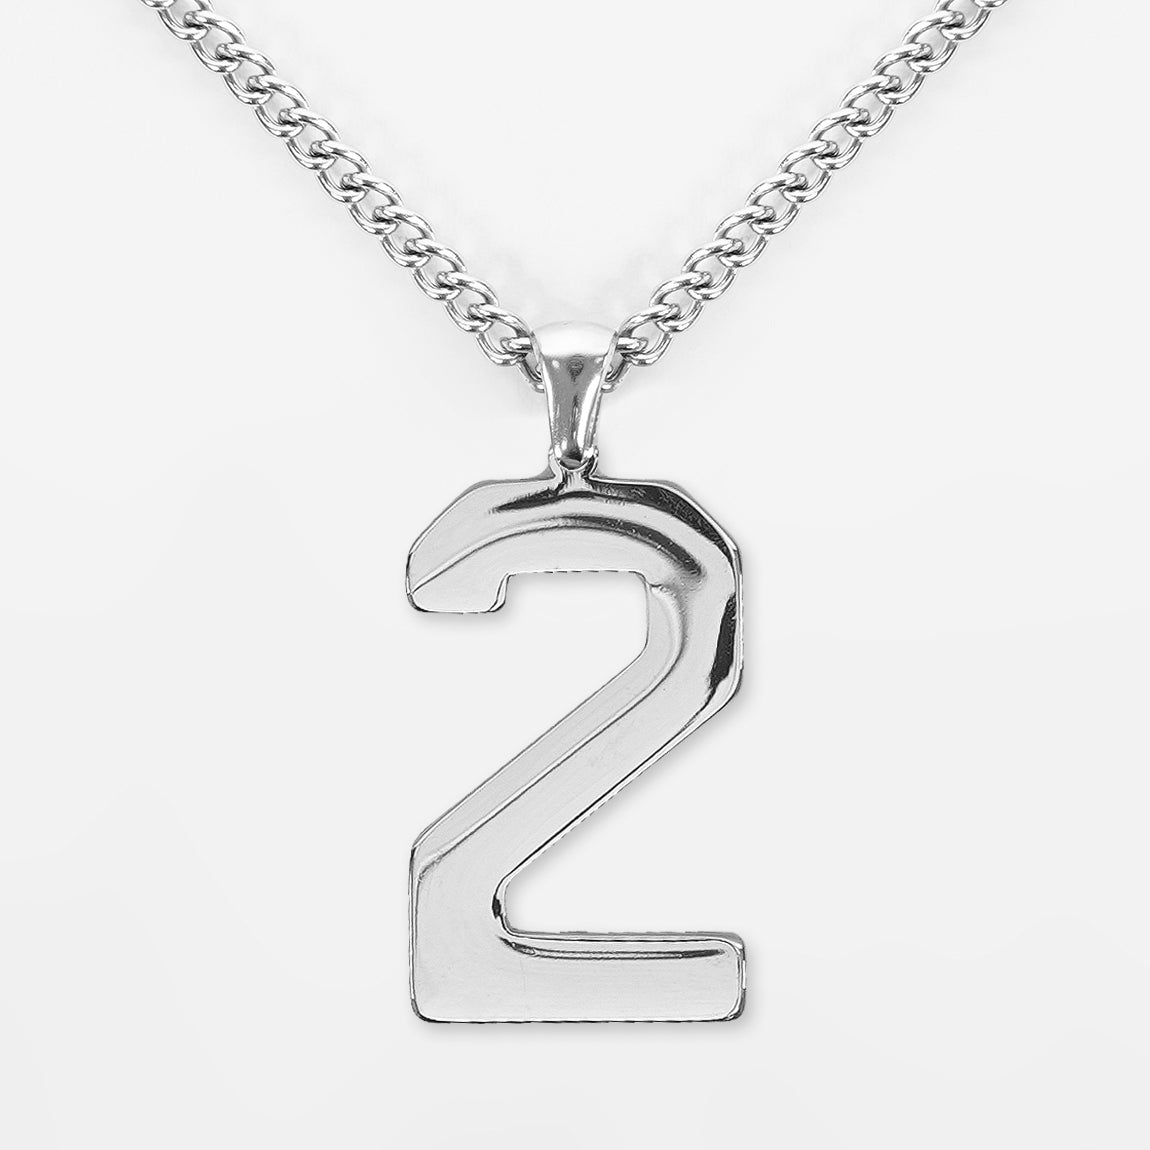 2 Number Pendant with Chain Necklace - Stainless Steel